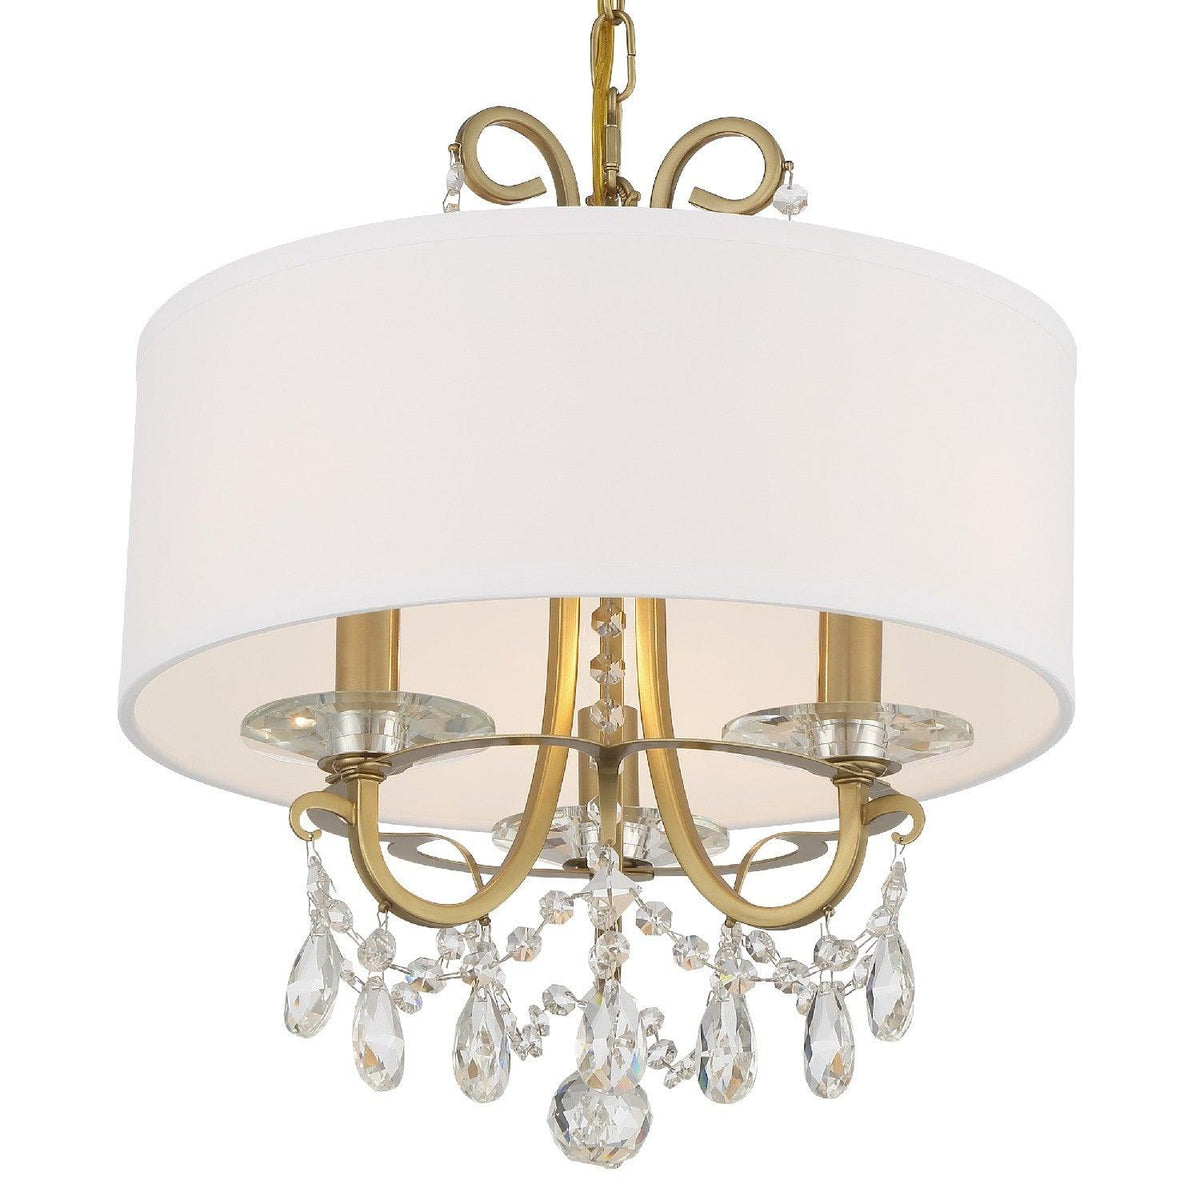 Crystorama - Othello Drum Shade Chandelier - 6623-VG-CL-S | Montreal Lighting & Hardware